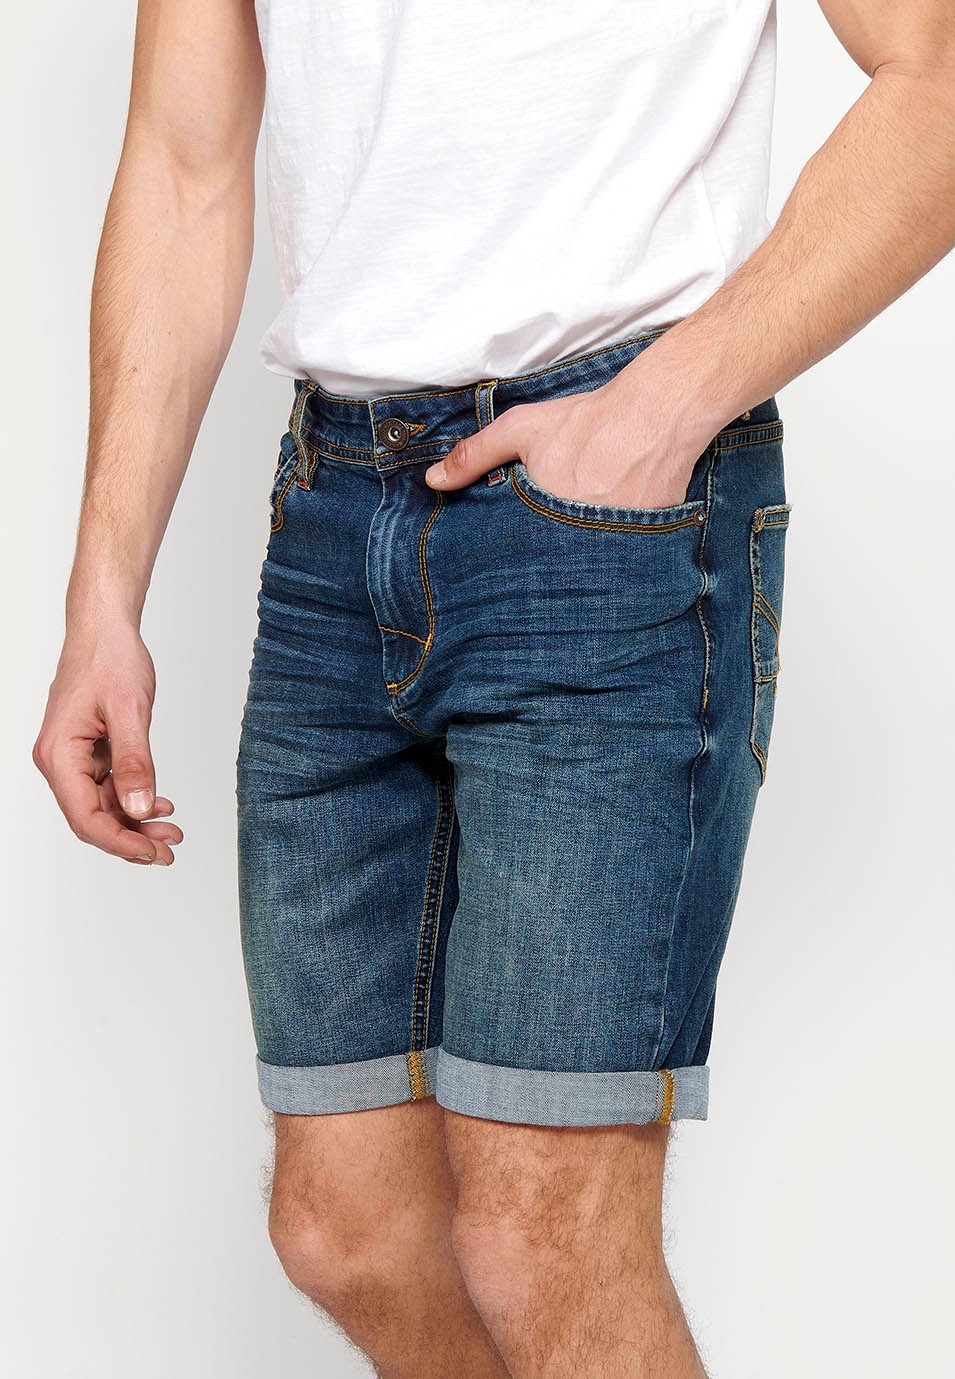 Bermuda denim shorts with front zipper and button closure with five pockets, one blue pocket pocket for Men 3